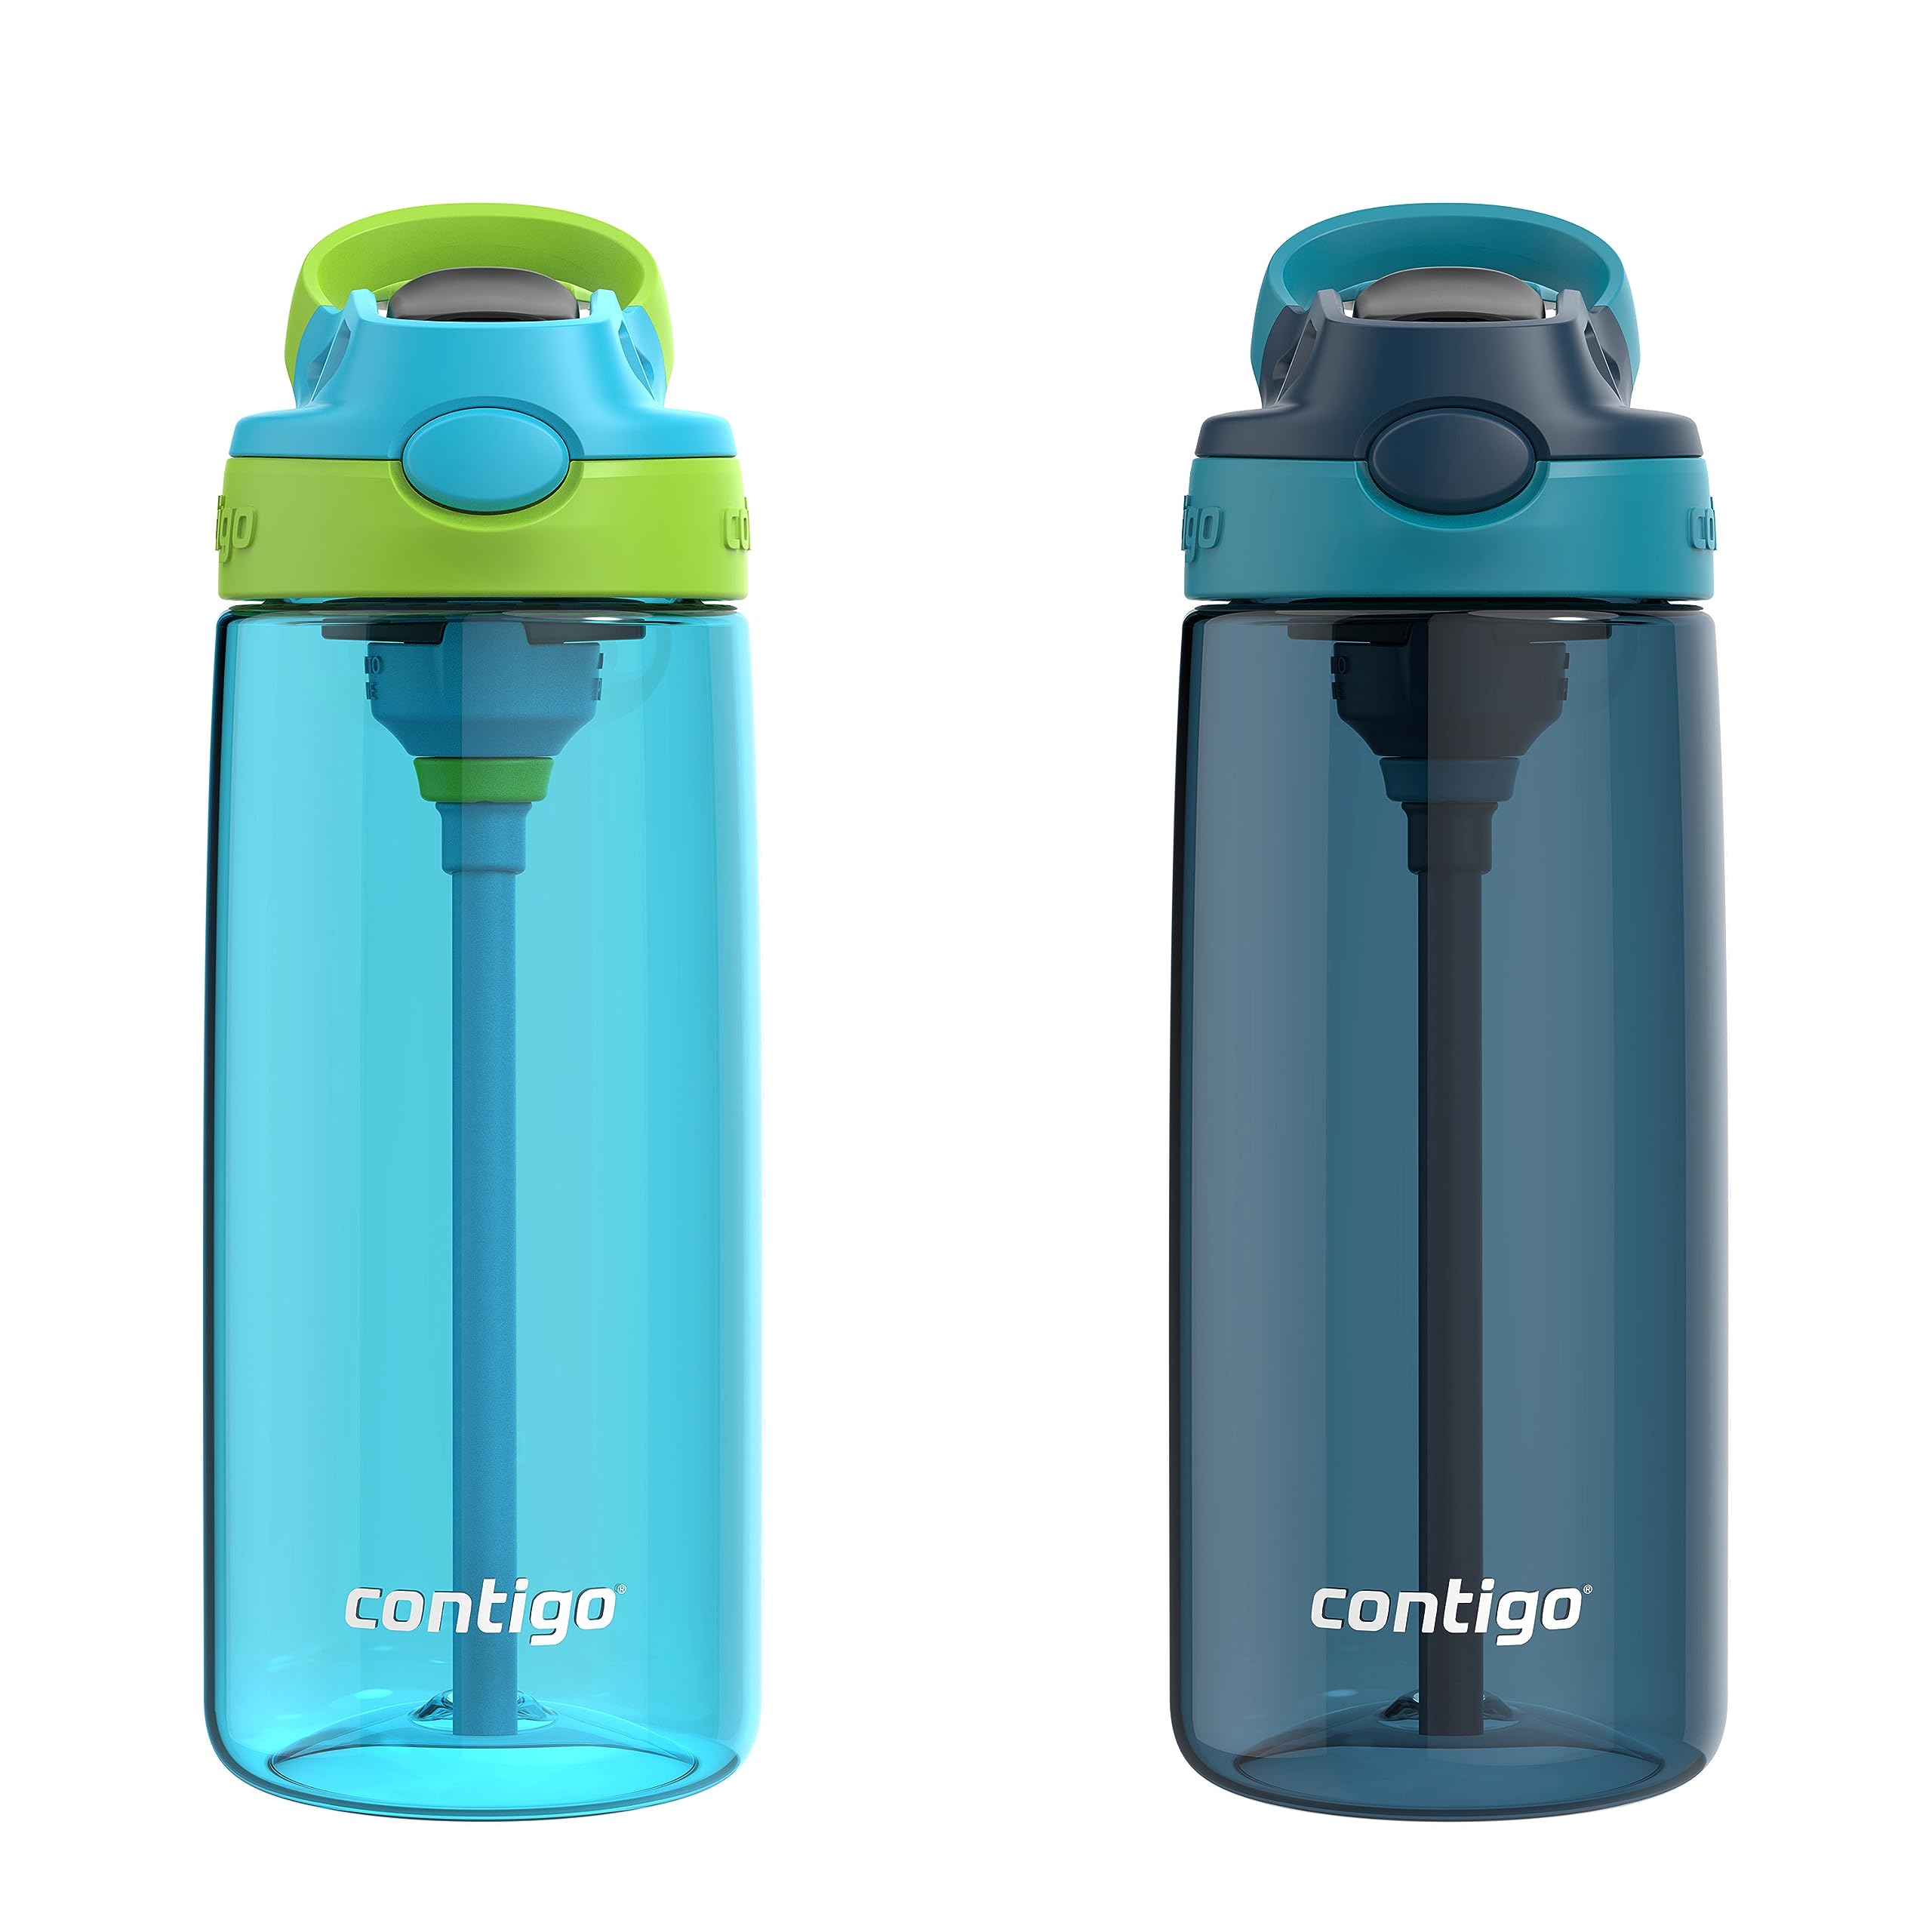 Contigo Aubrey Kids Cleanable Water Bottle with Silicone Straw and Spill-Proof Lid, Dishwasher Safe, 20oz 2-Pack, Blue Raspberry/Cool Lime & Blueberry/Juniper